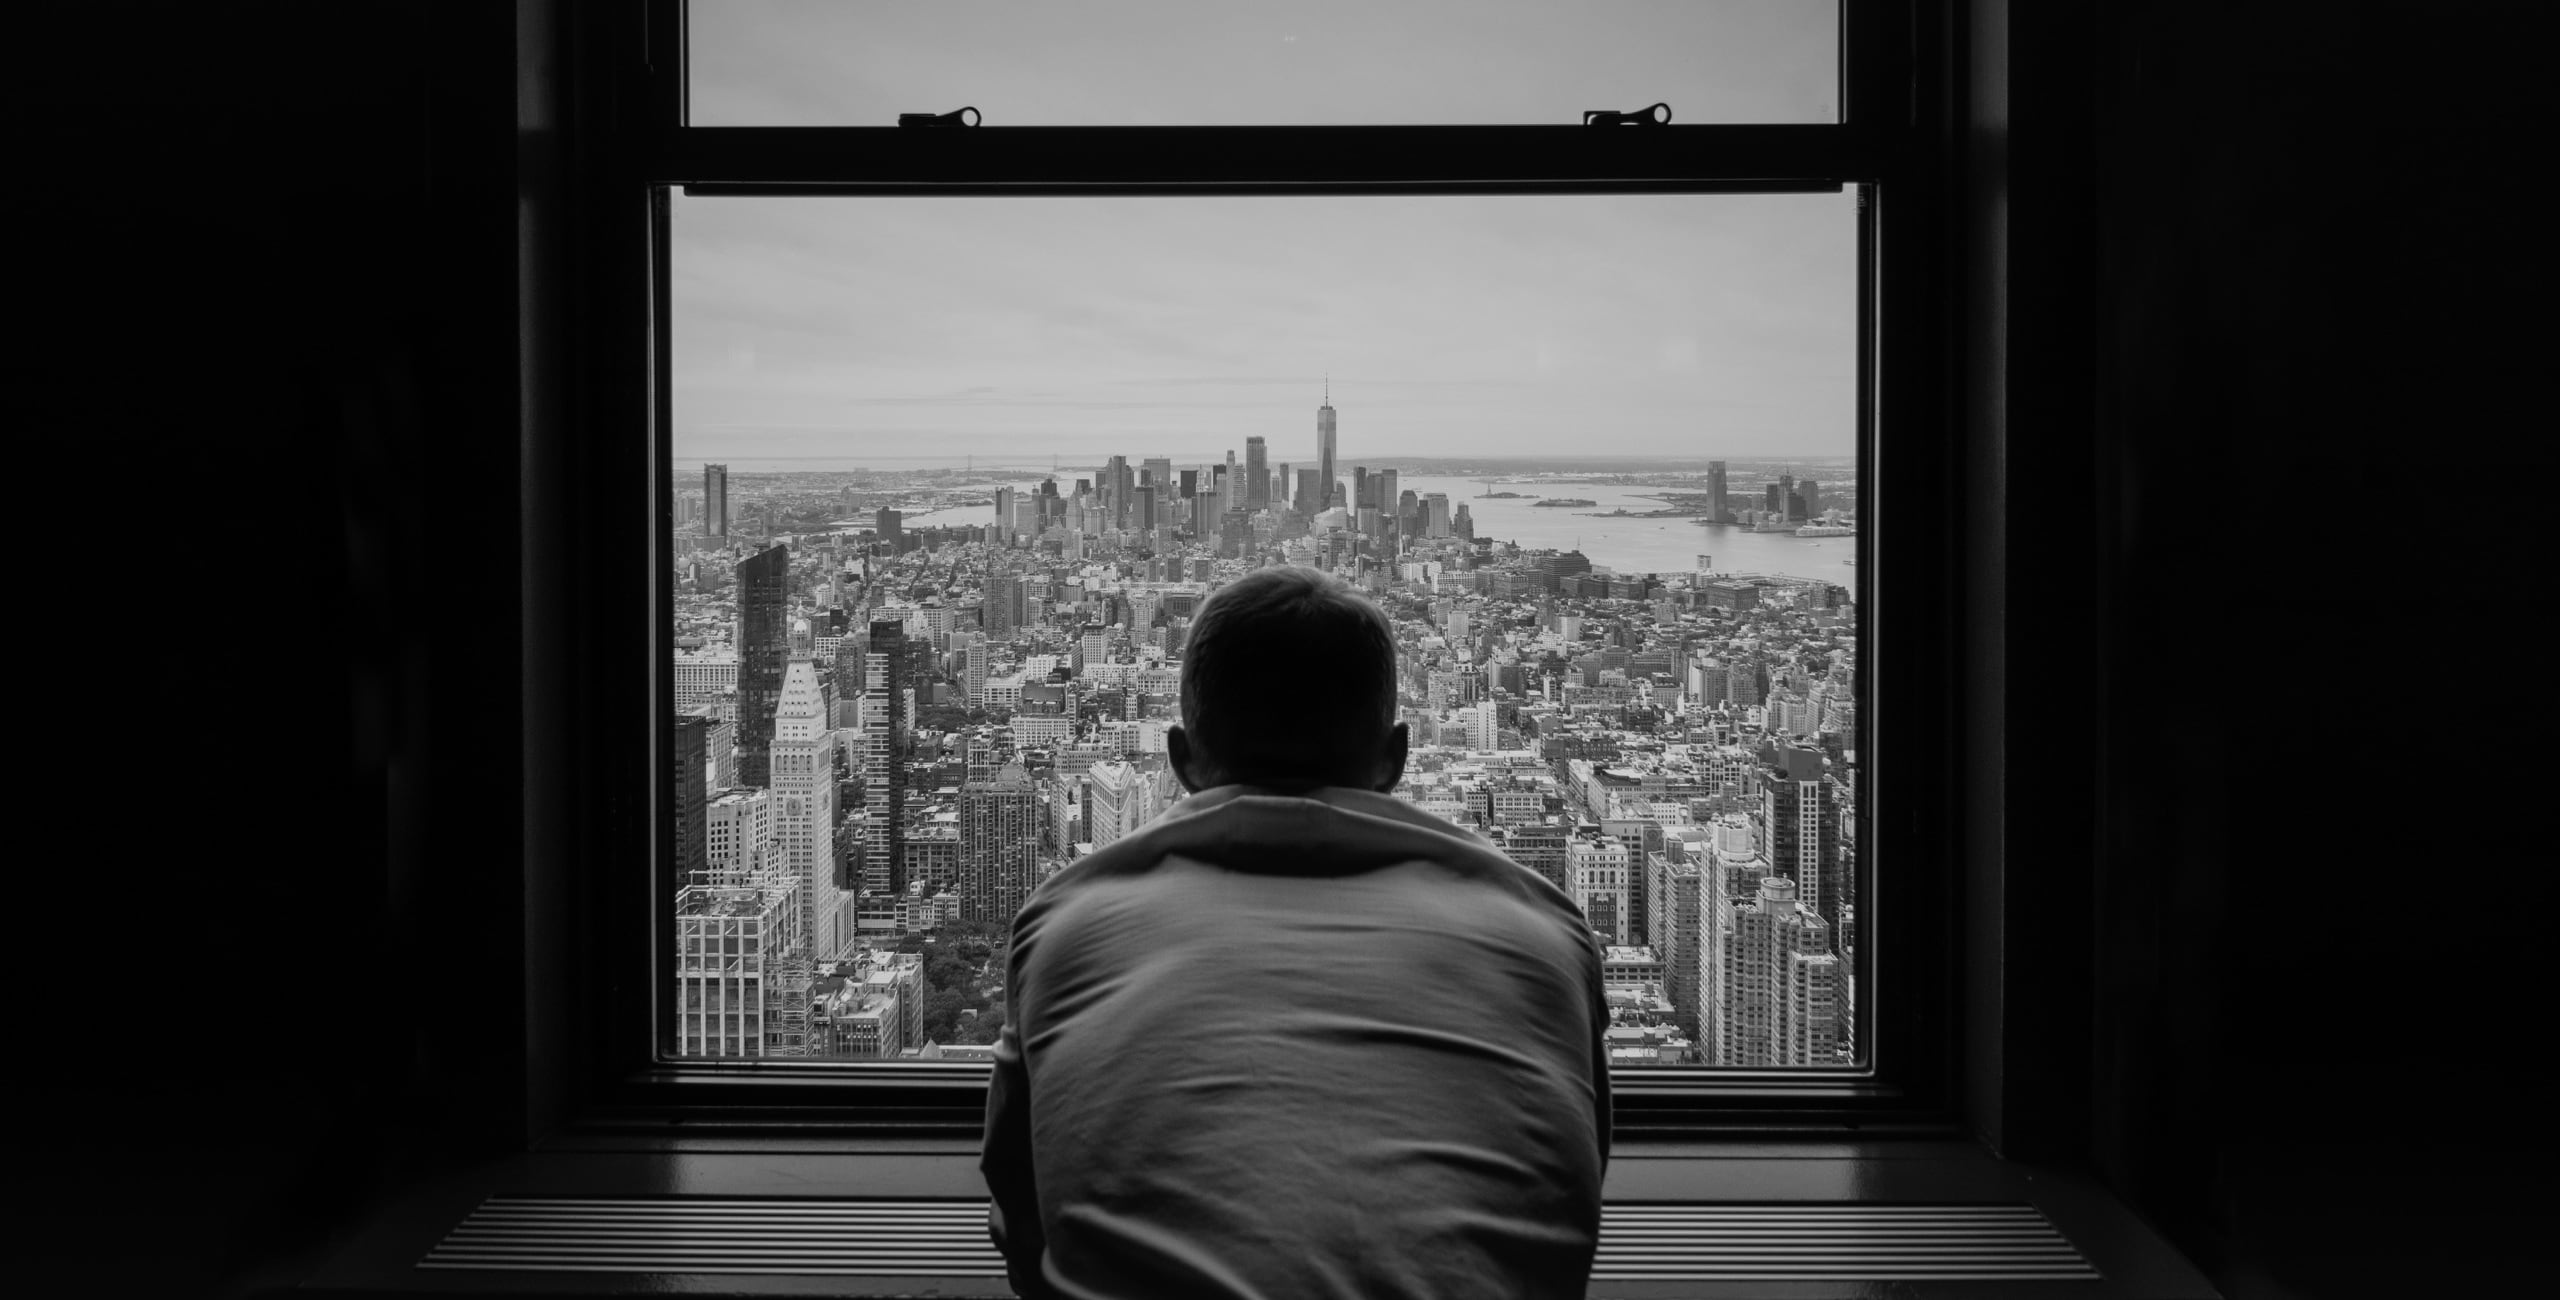 Black and white photo of a man looking out a window in new york city.